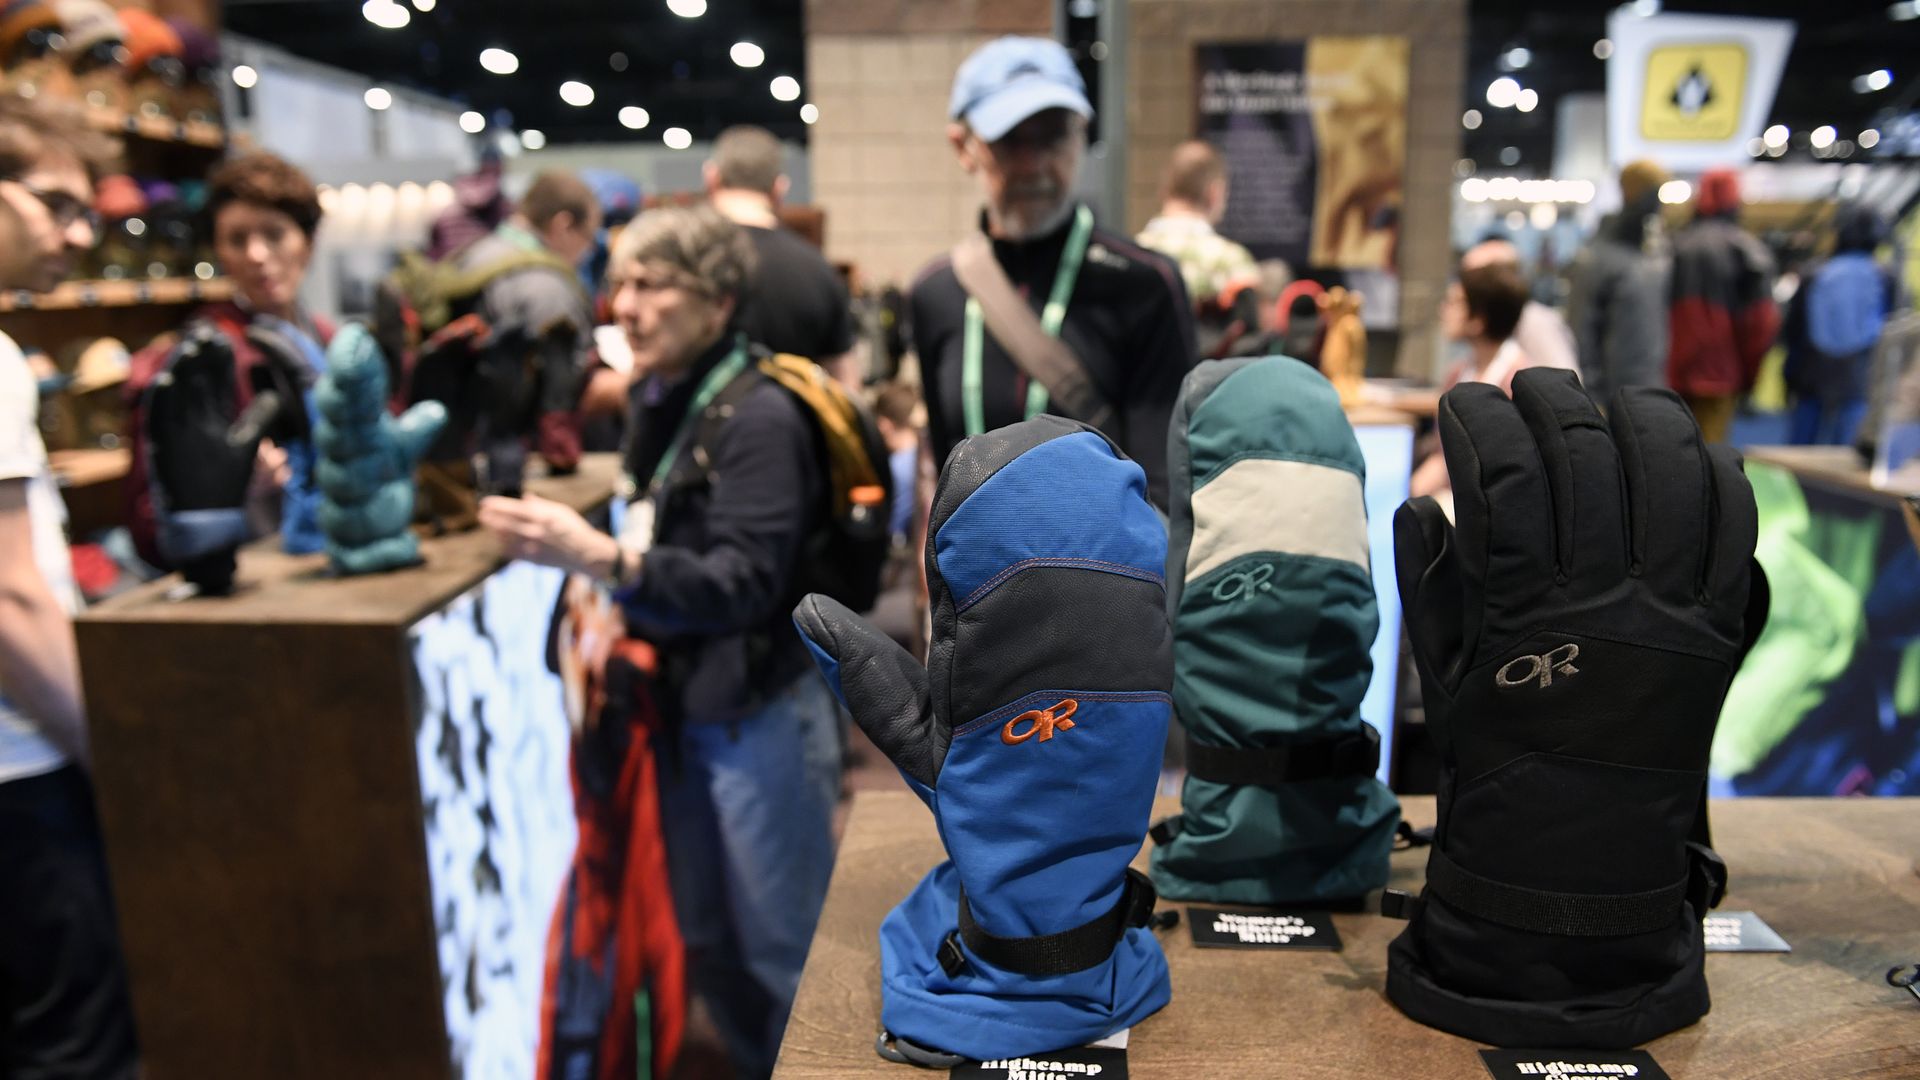 Merchandise on display at the Outdoor Retailer Snow Show in 2018. Photo: Helen H. Richardson/The Denver Post via Getty Images